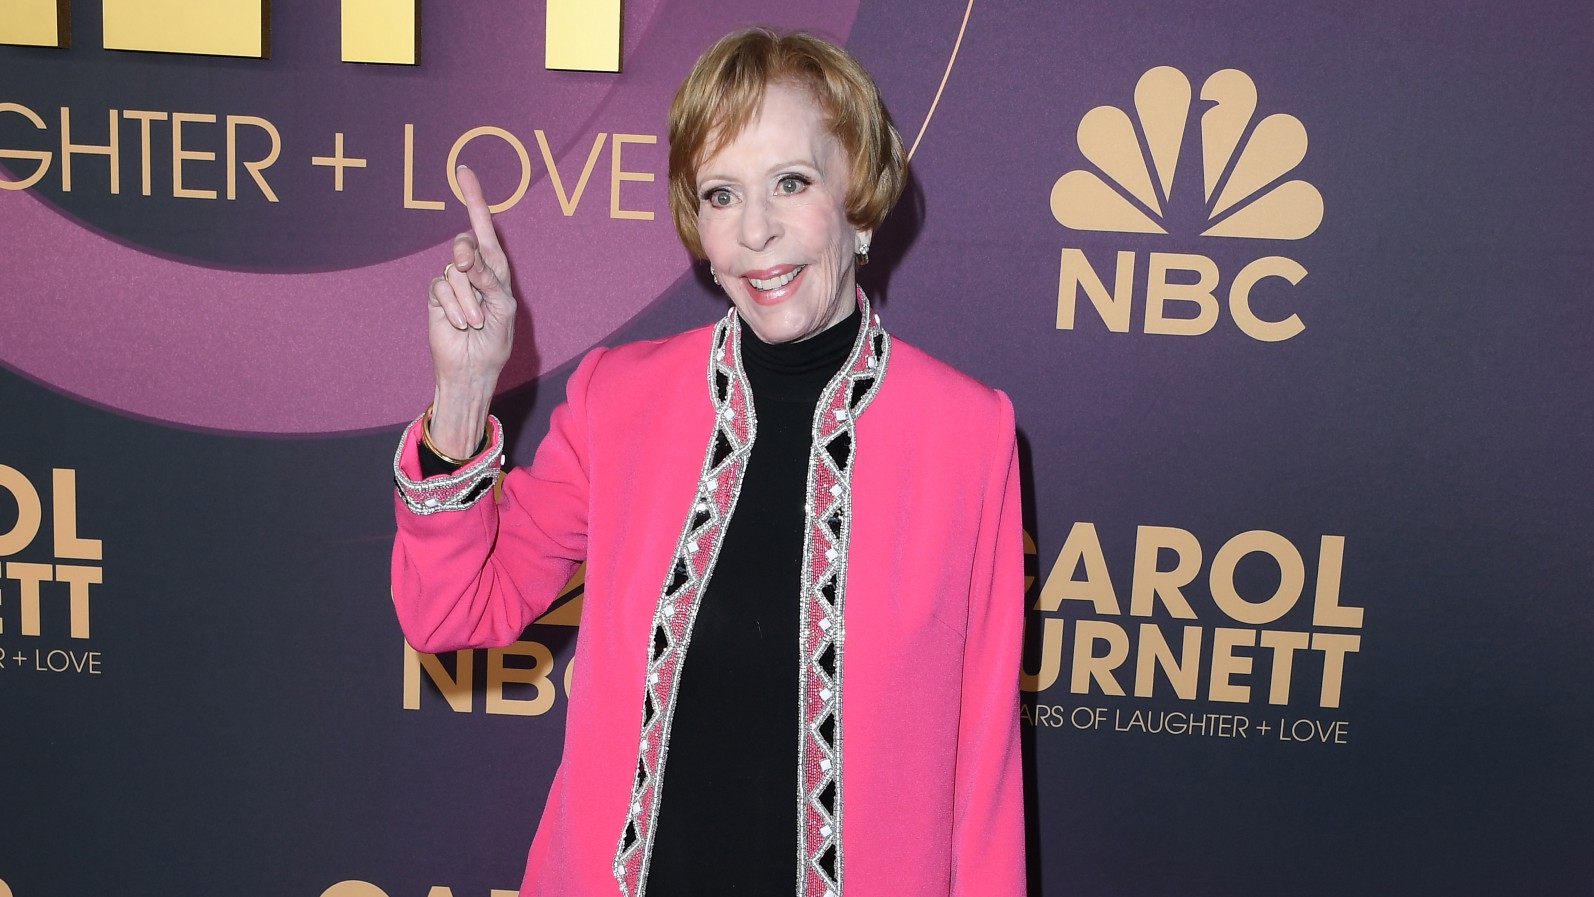 Legendary Comedian Carol Burnett Says Her Show Could Never Happen Today, Misses Classic Comedy Sketch Entertainment